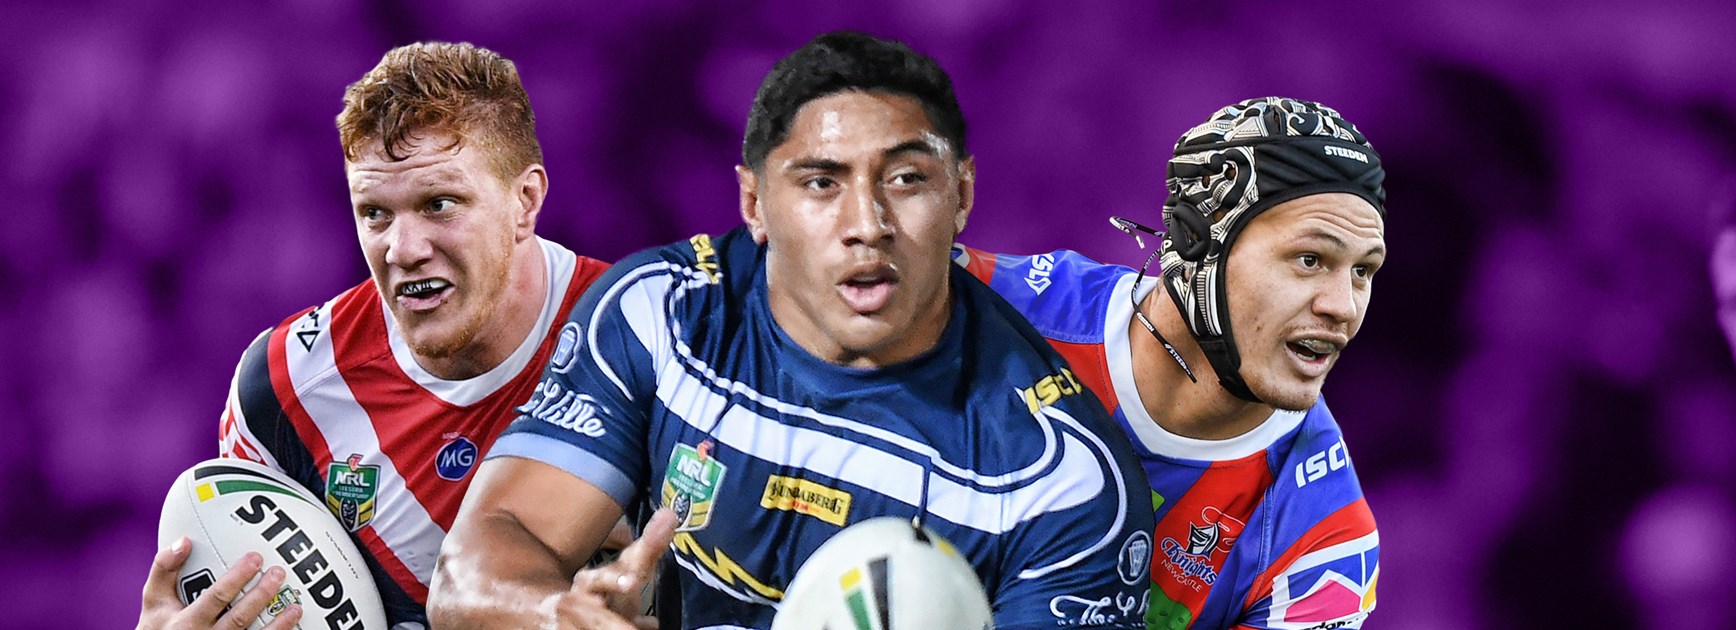 NRL.com Players' Poll: Part 3 - Rule changes, best young player, hardest to tackle, biggest hitter